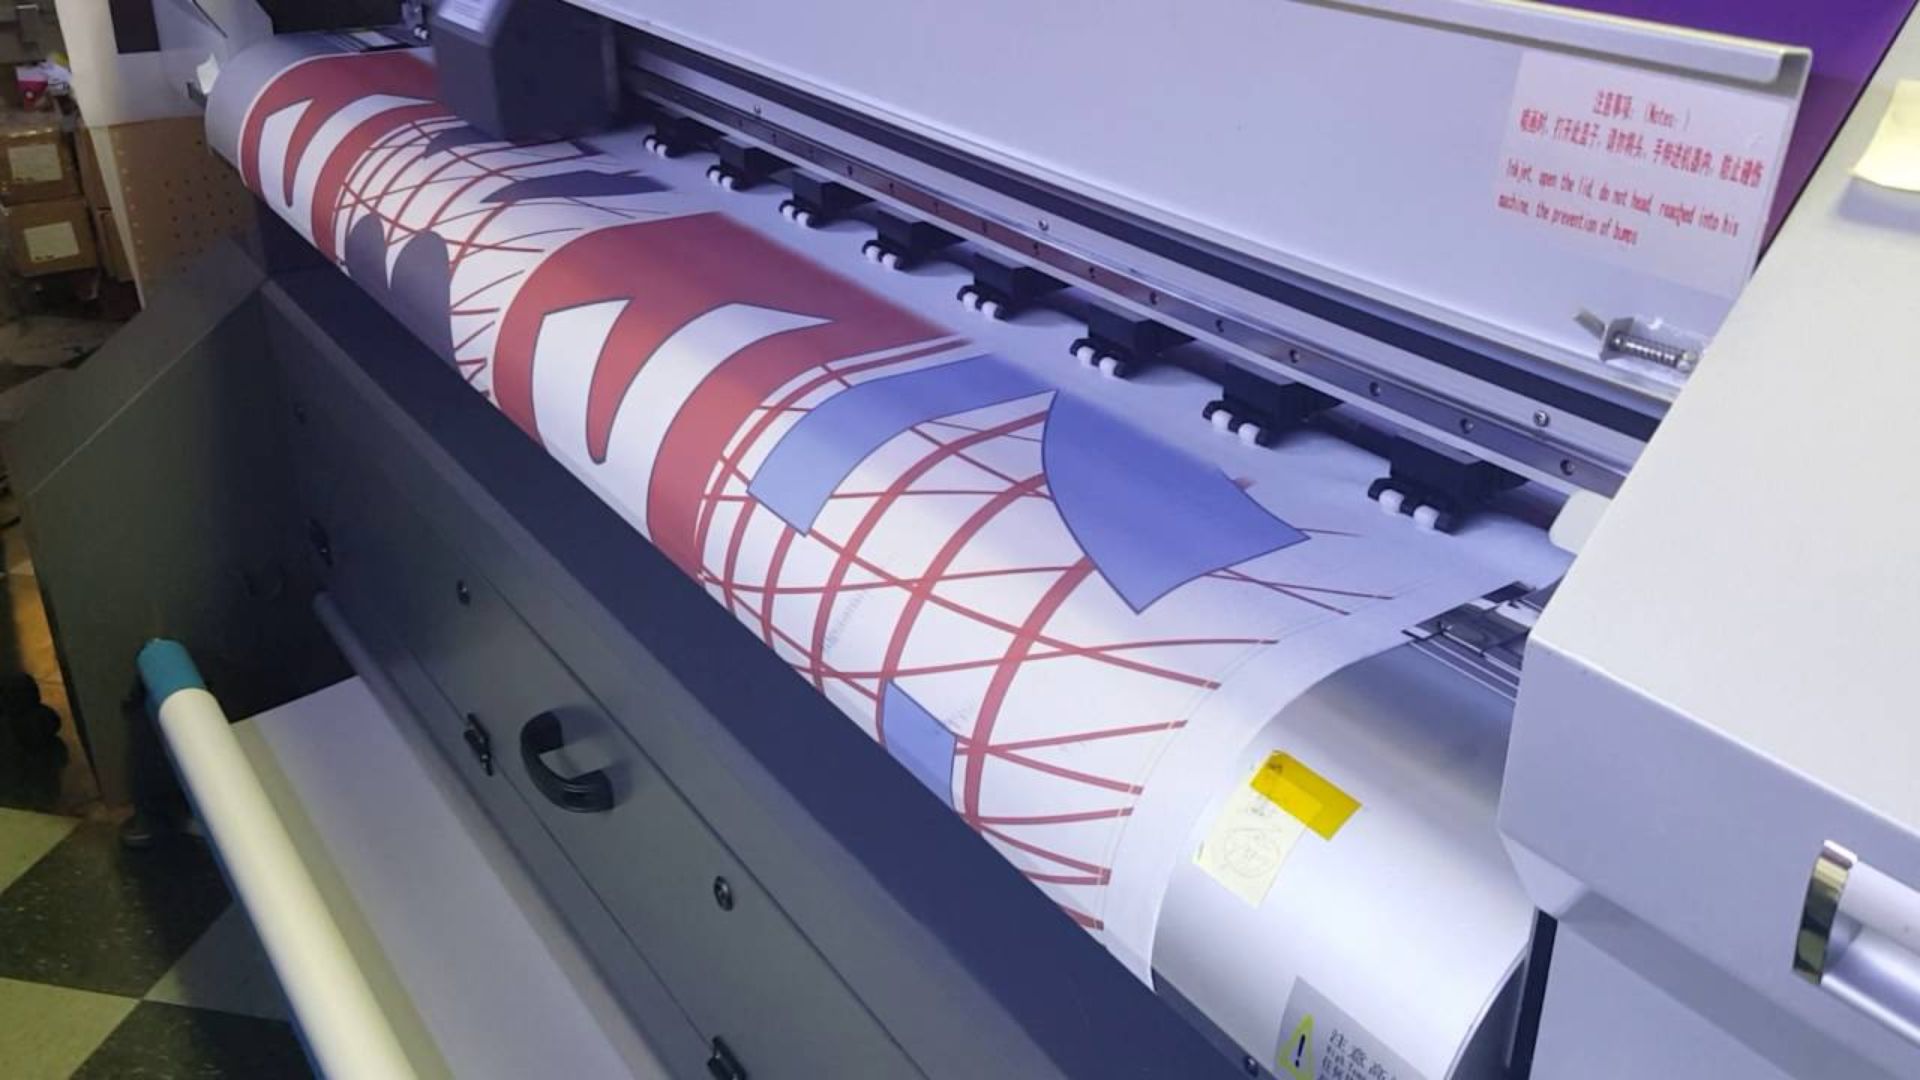 Creating Eye-Catching Displays with Flag Printing